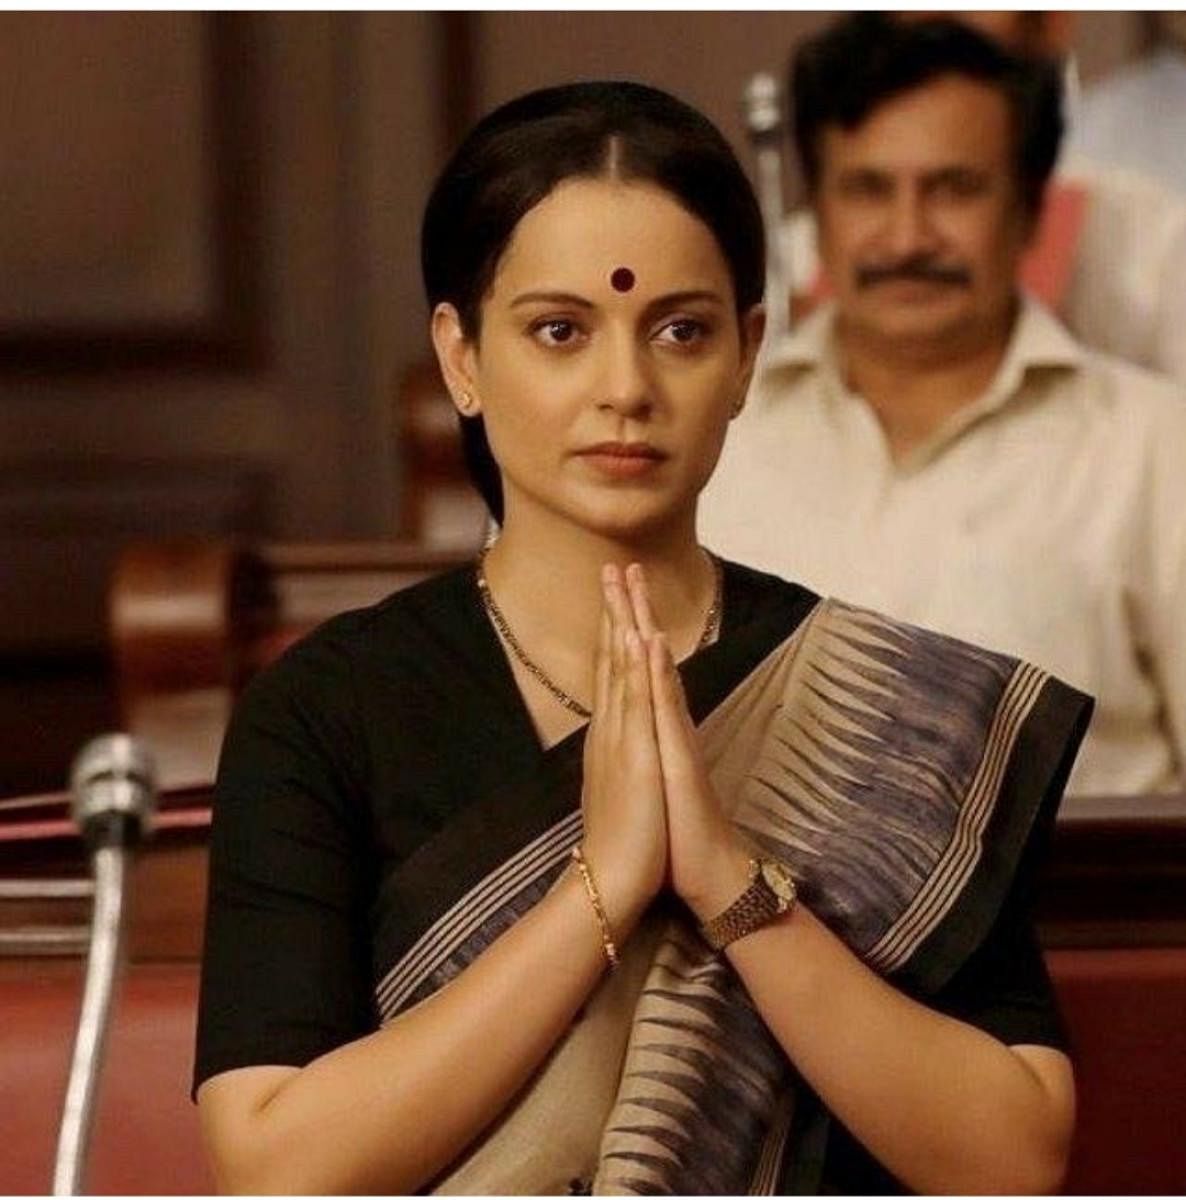 Thalaivii', starring Kangana Ranaut, is a biopic on former Tamil Nadu chief minister J Jayalalithaa. The film has no underlying conflict and shows the politician as an epic character. 